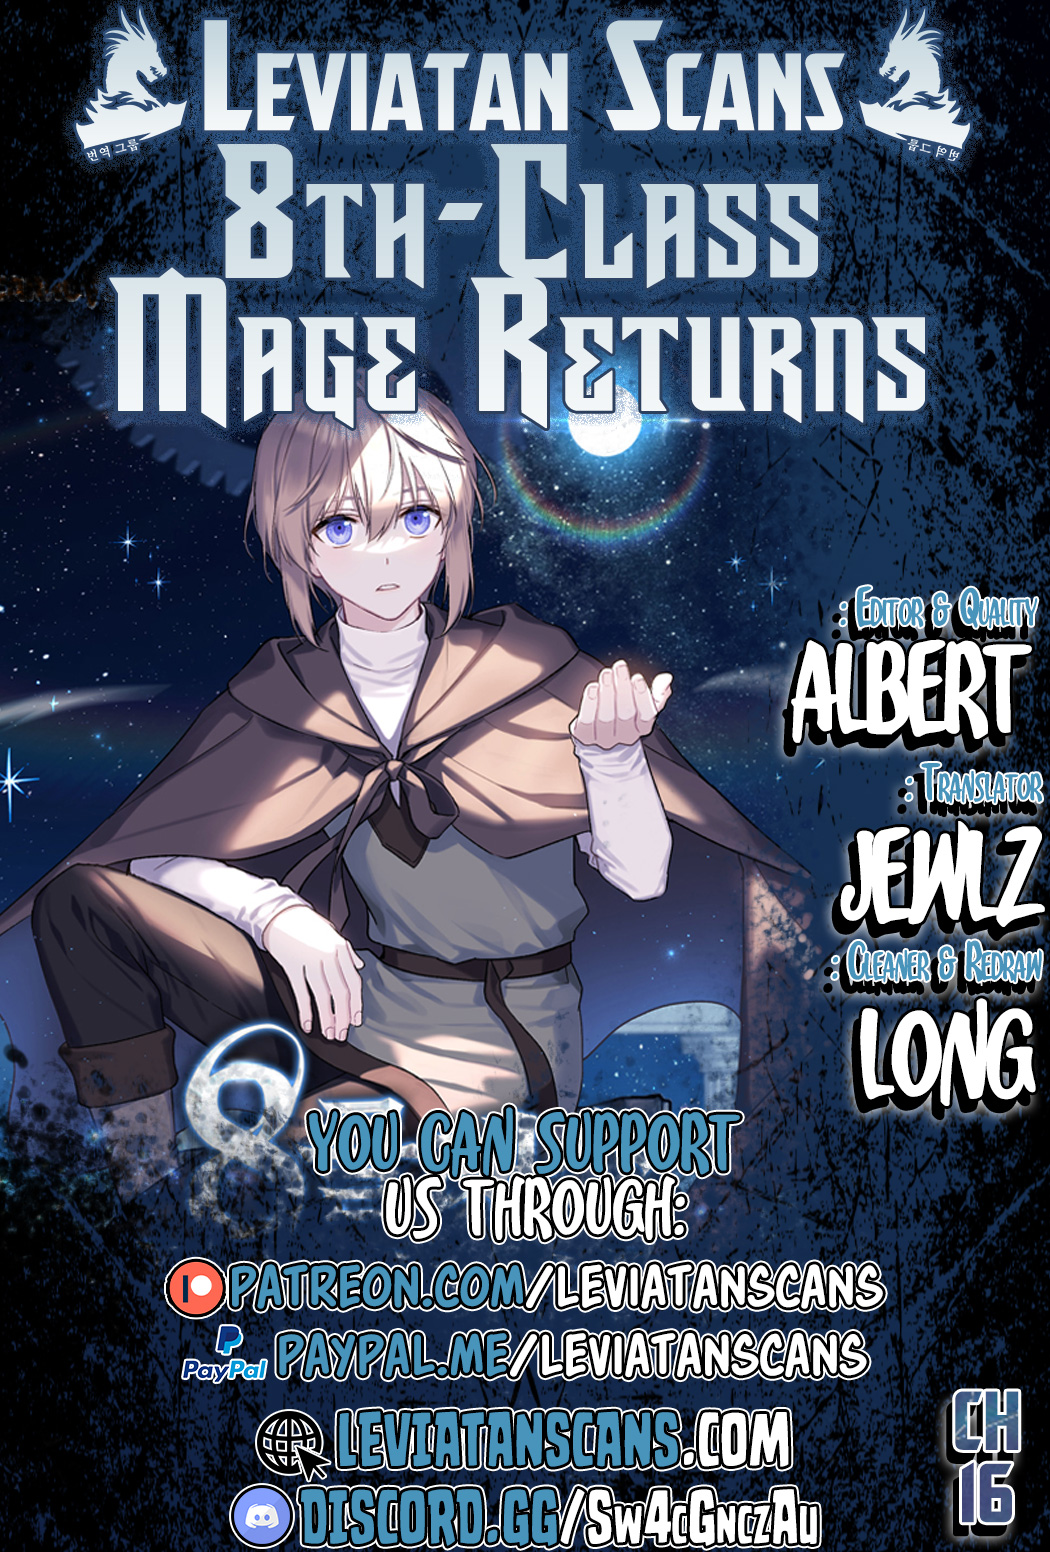 Return of the 8th Class Magician - Chapter 7135 - Image 1